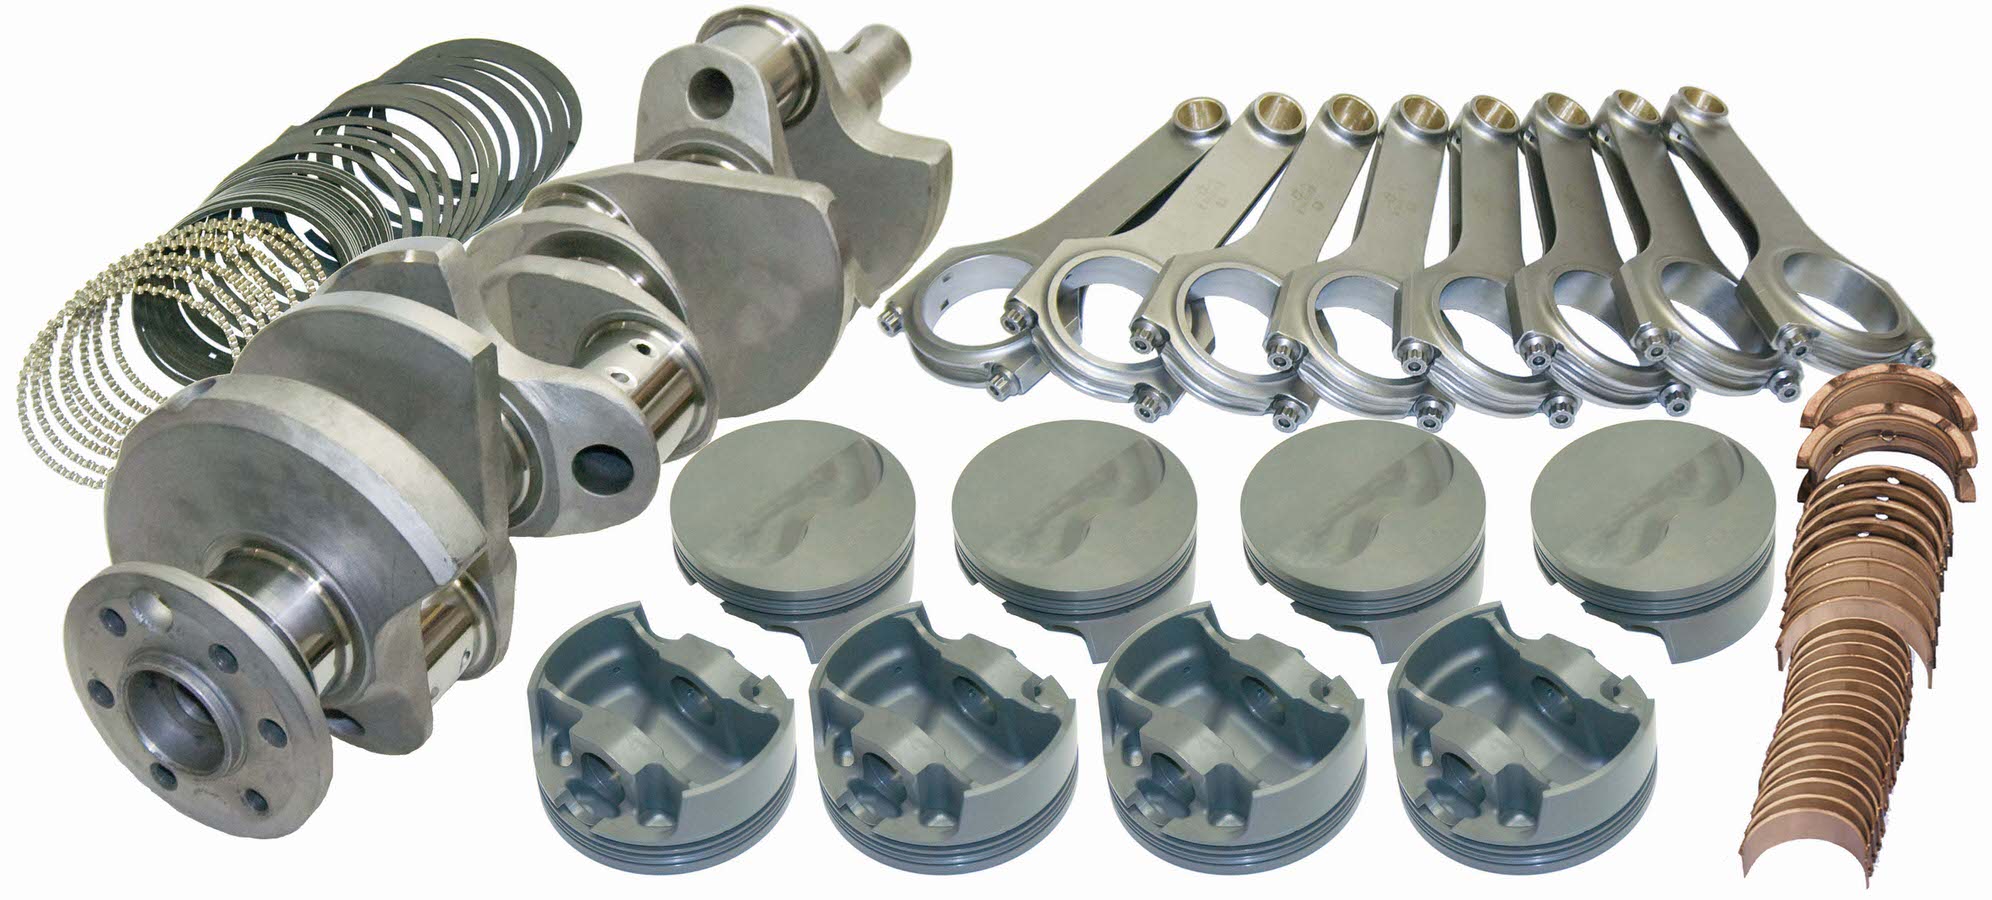 Eagle Specialty Products 500 Crankshaft Adapter for Big Block Chevy